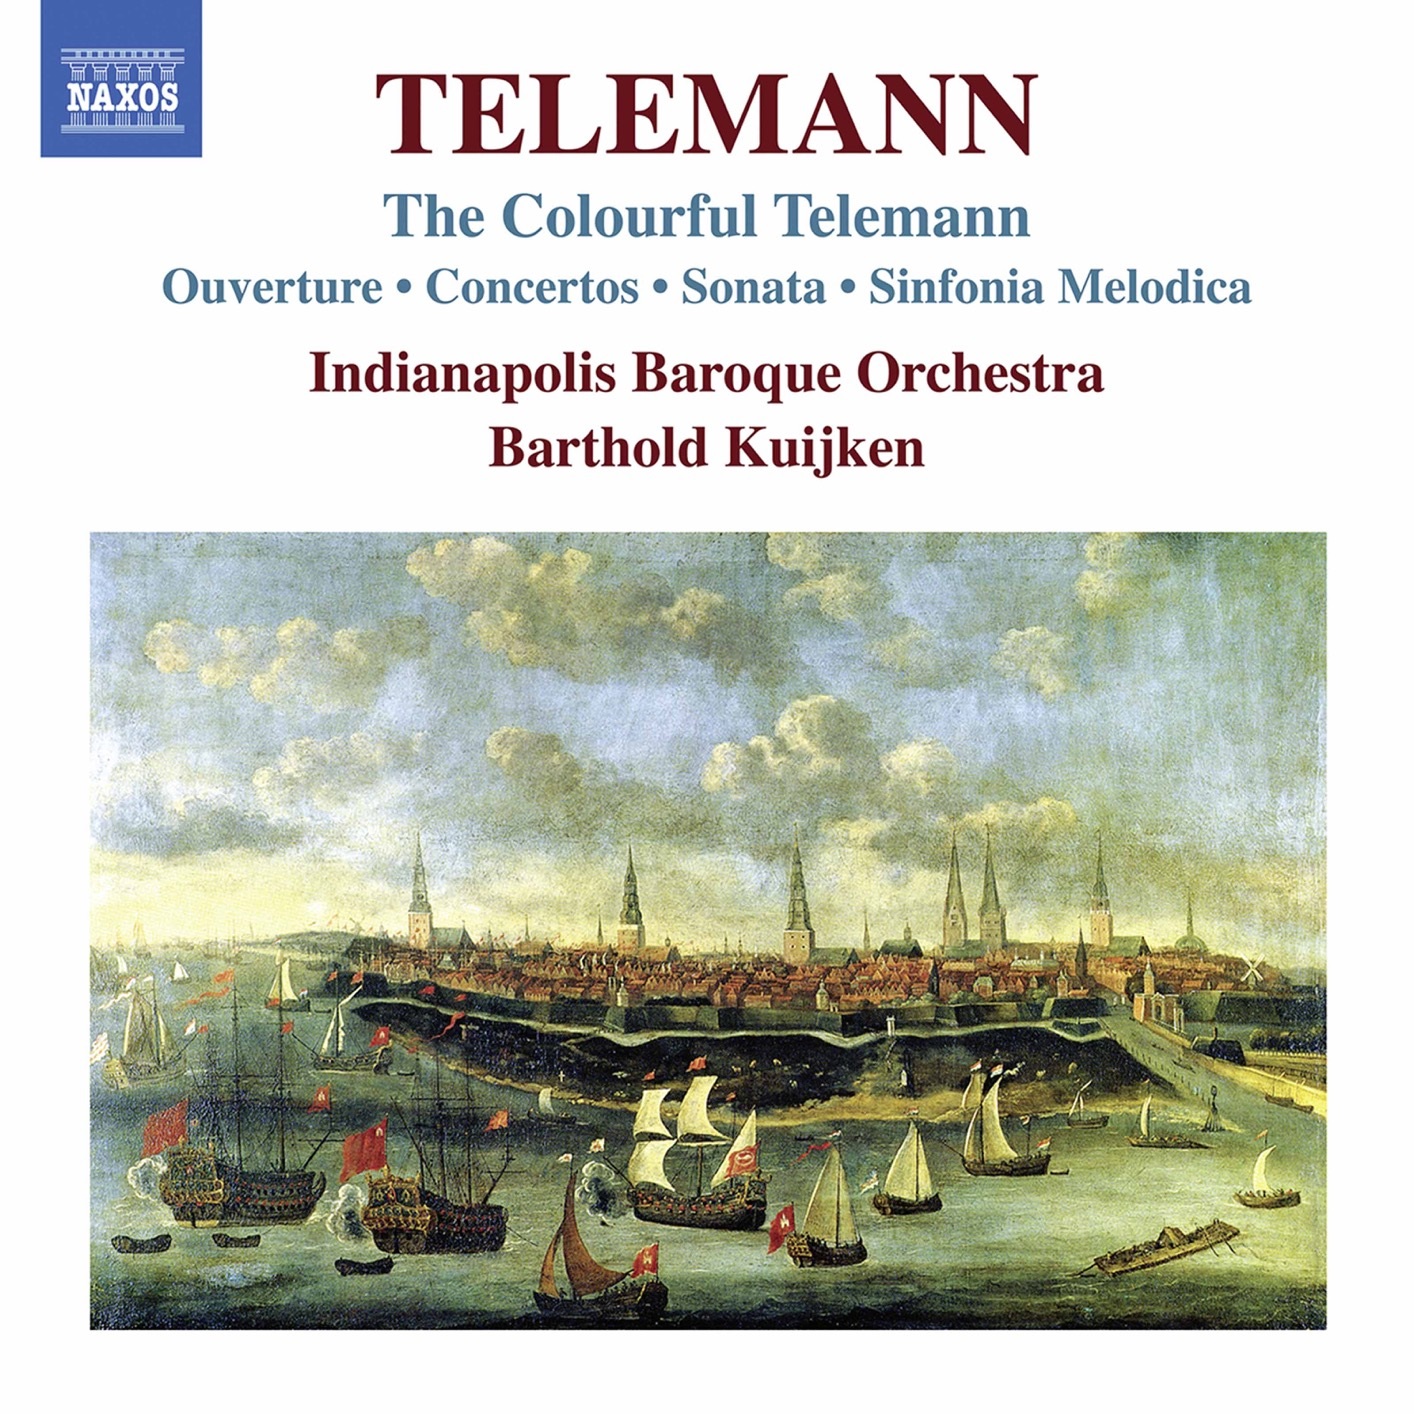 Indianapolis Baroque Orchestra & Barthold Kuijken – The Colorful Telemann (2020) [FLAC 24bit/96kHz]